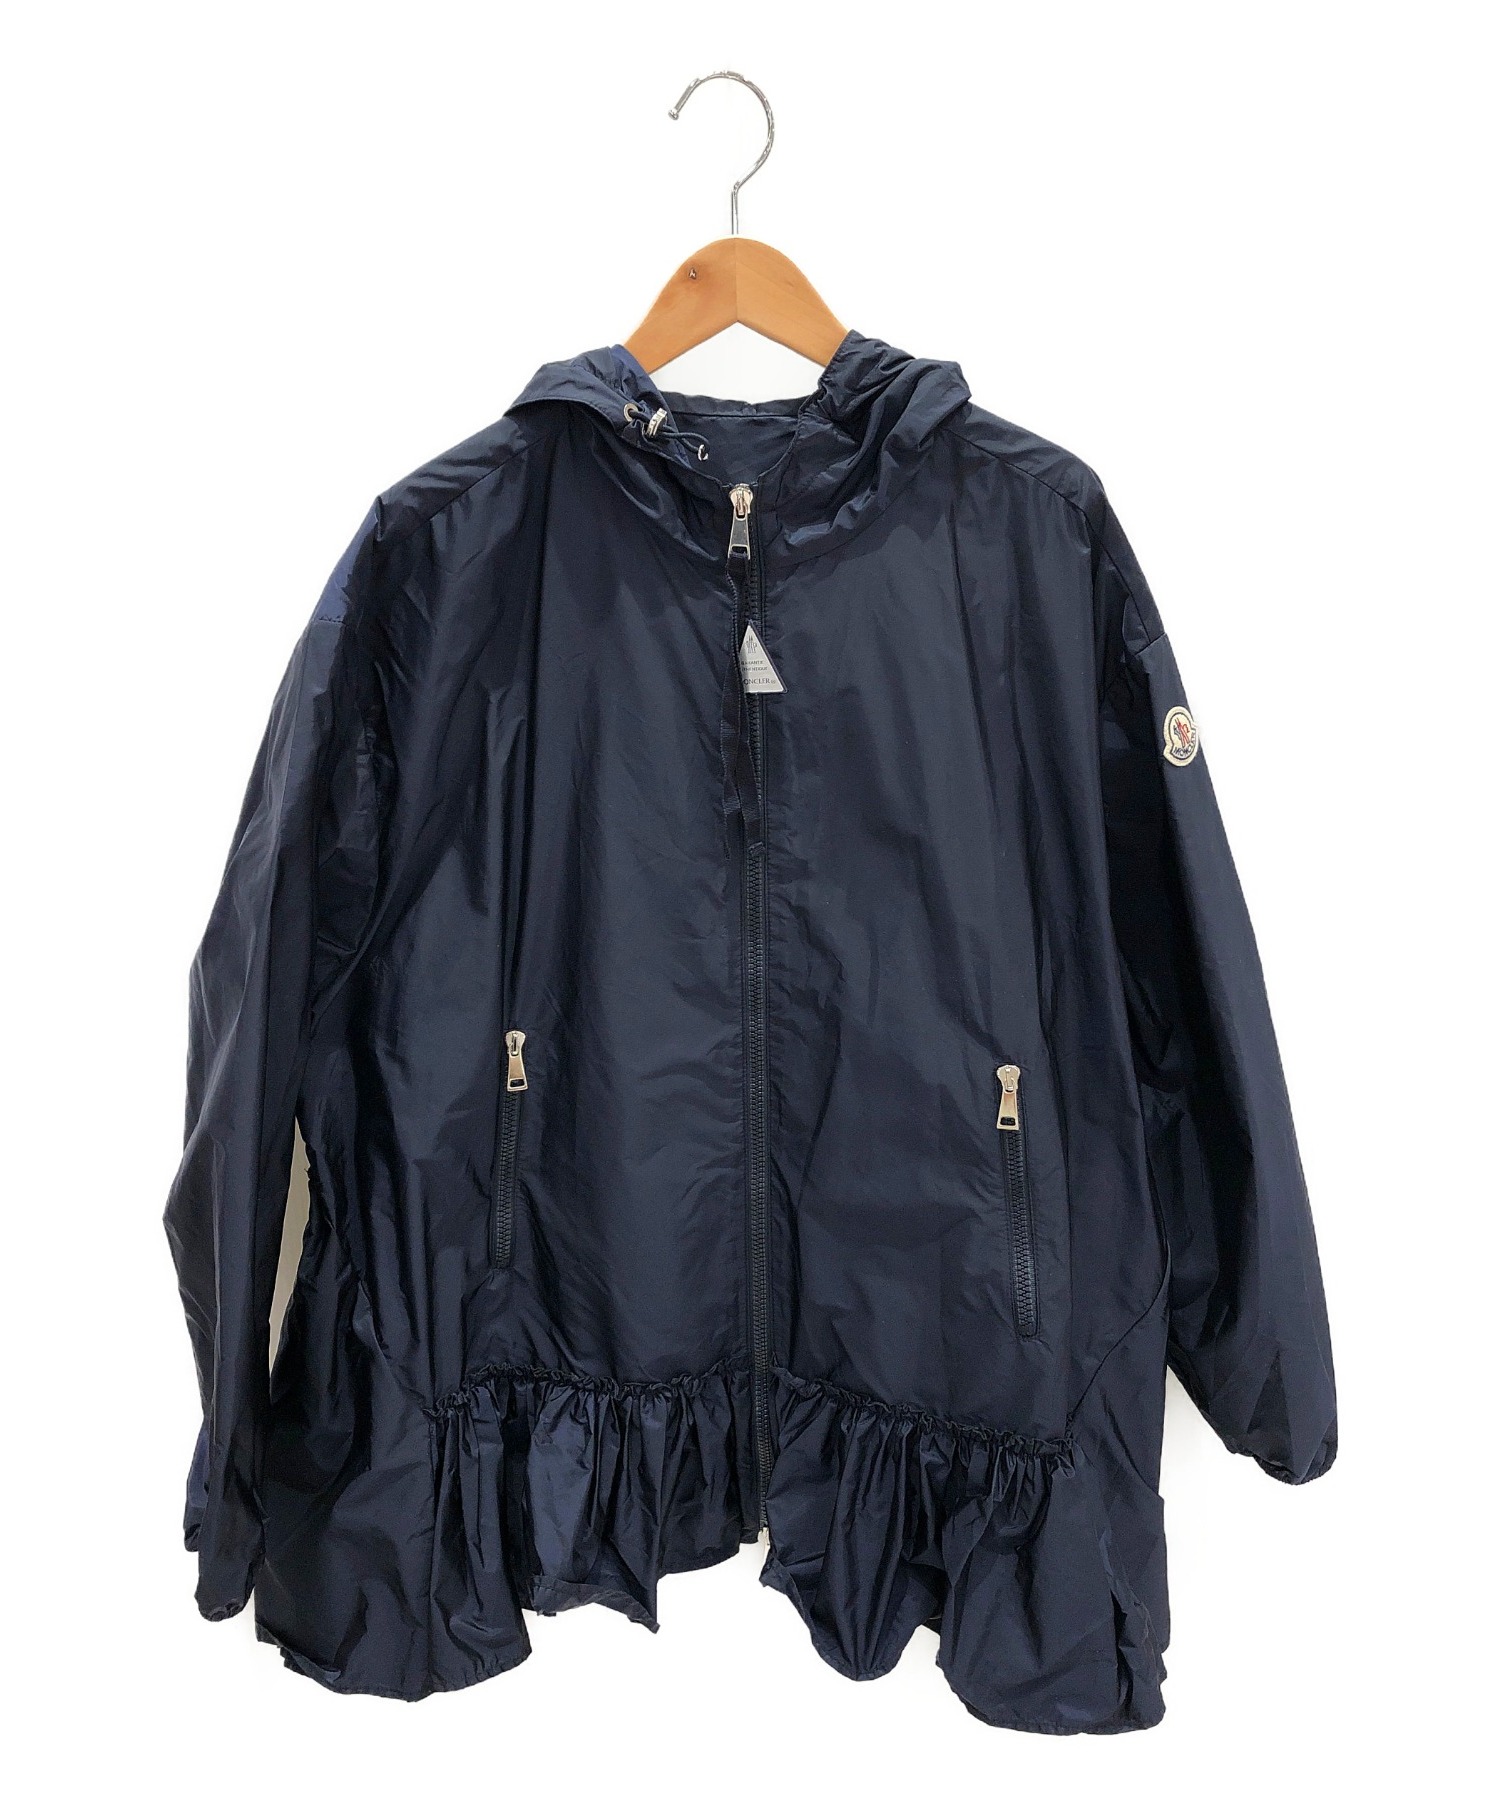 18AW MONCLER TBILISSI モンクレール ナイロン ジャケット